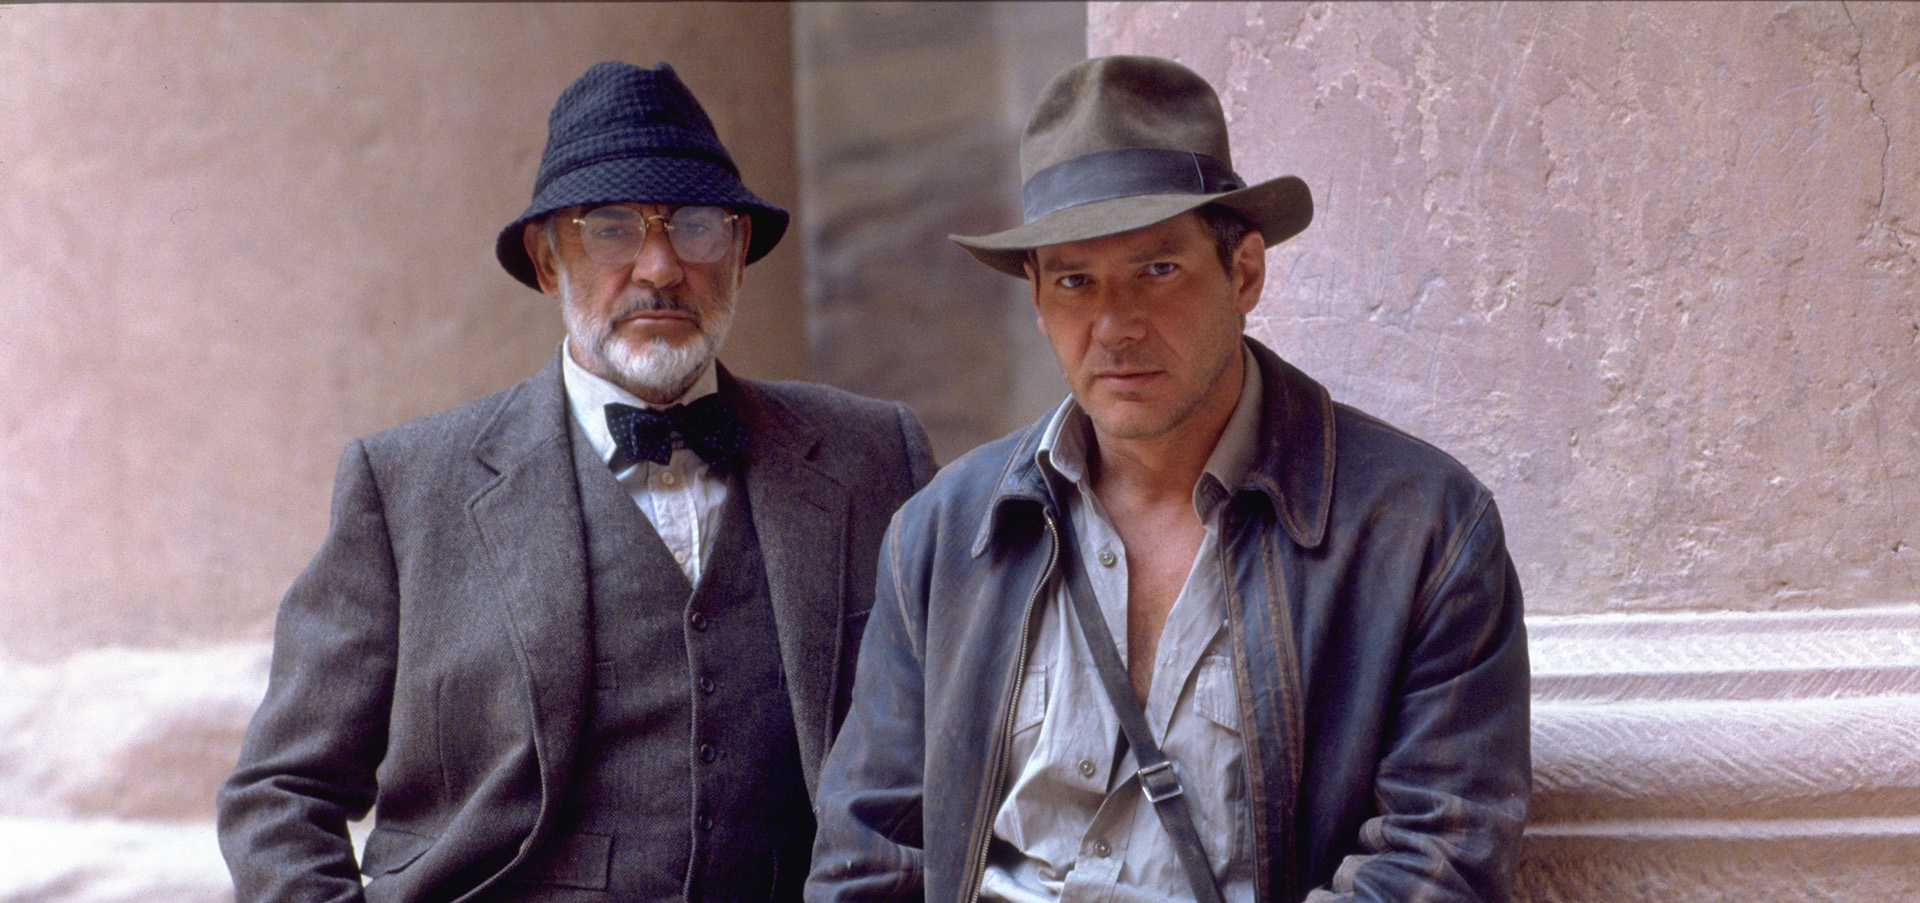 Sean Connery as Henry James Sr alongside Harrison Ford's Junior in Indiana Jones and the Last Crusade.